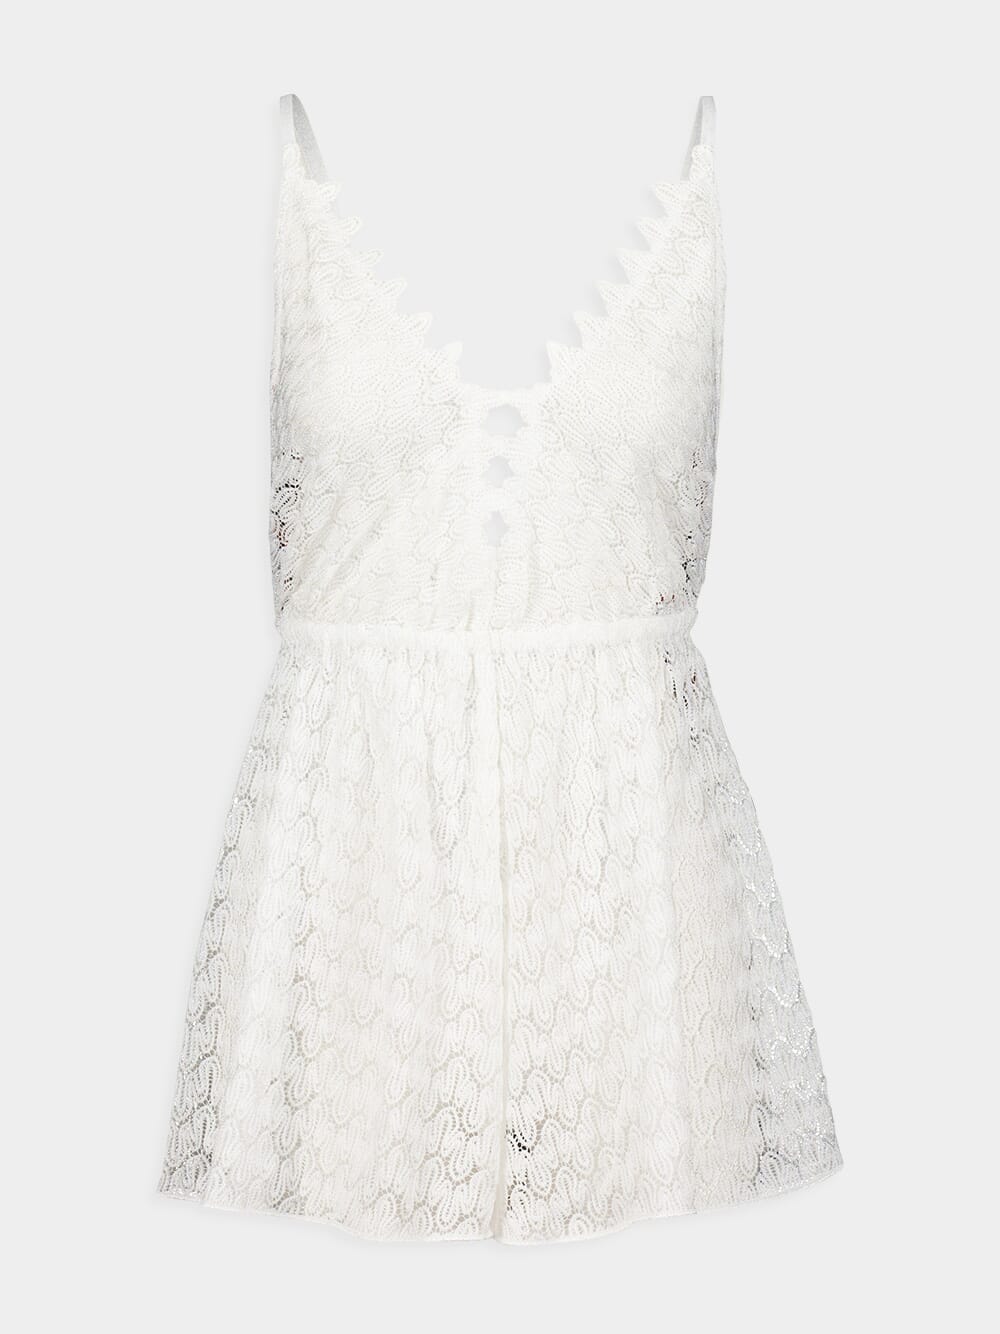 Missoni MareCrochet-Knit Semi-Sheer Playsuit in White at Fashion Clinic